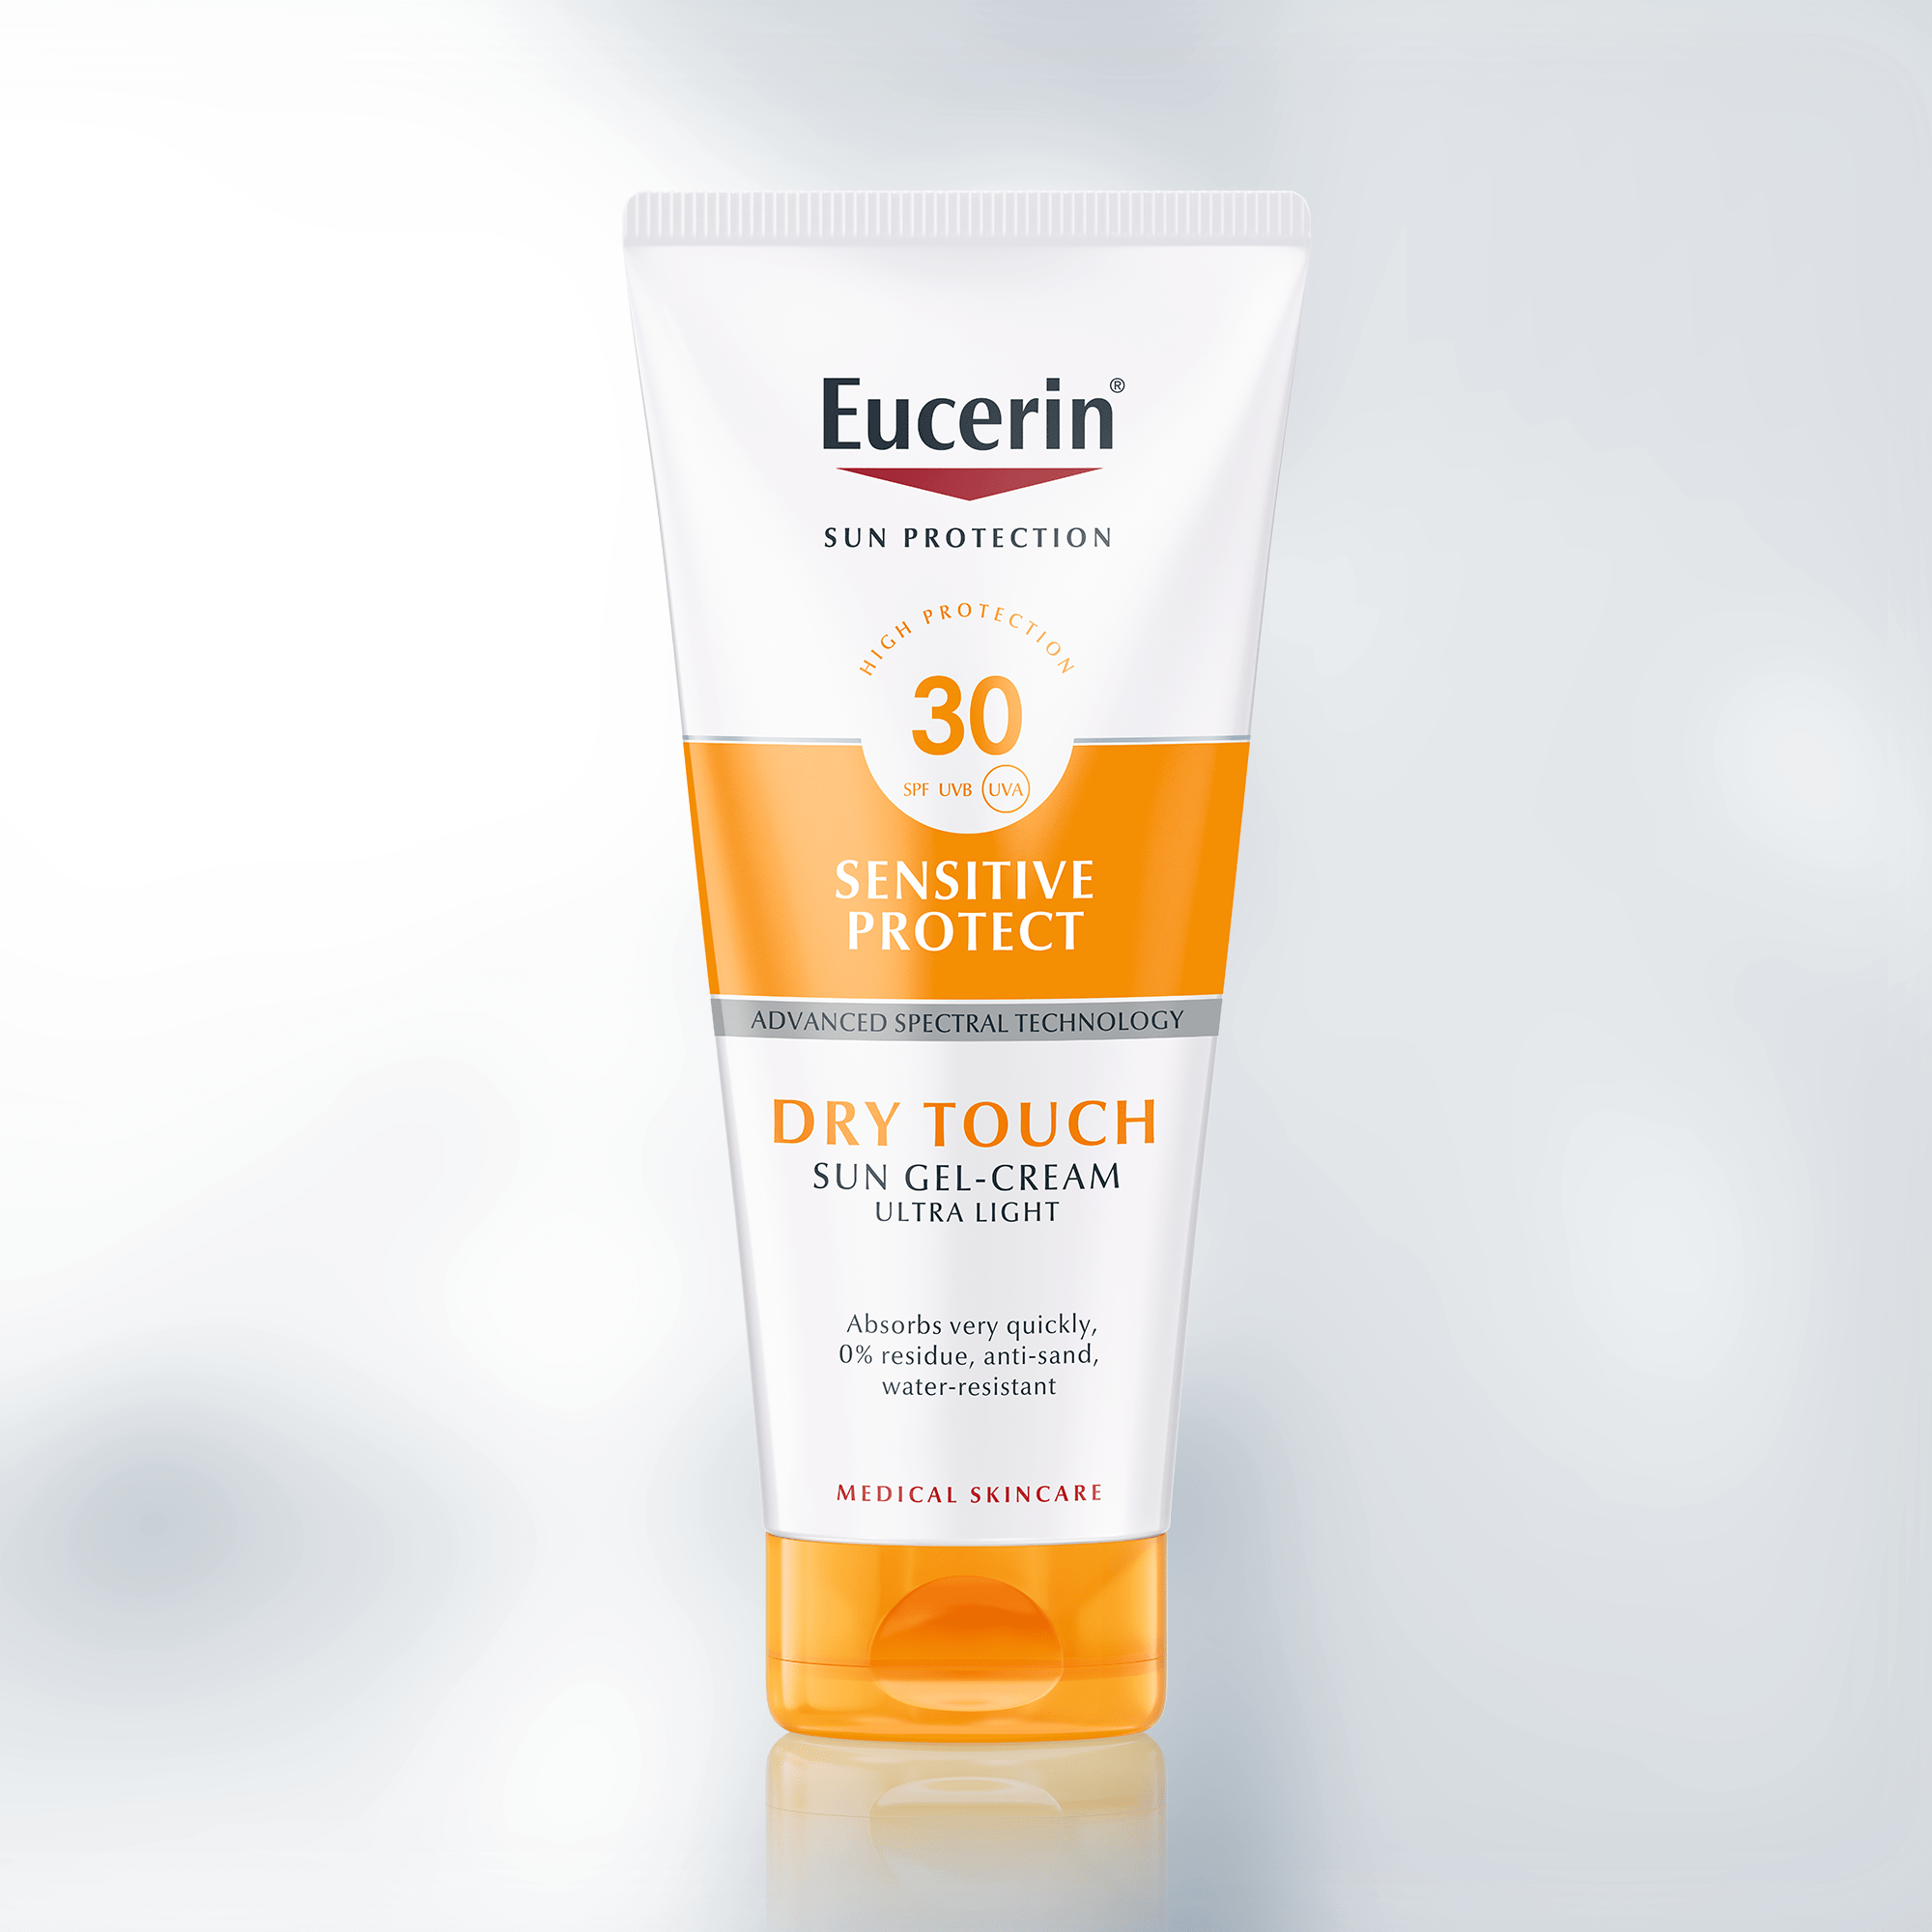 _sun_sun_gel_cream_dry_touch_sensitive_protect_spf_30_03_2020_packshot_bv_png_2000x2000.png